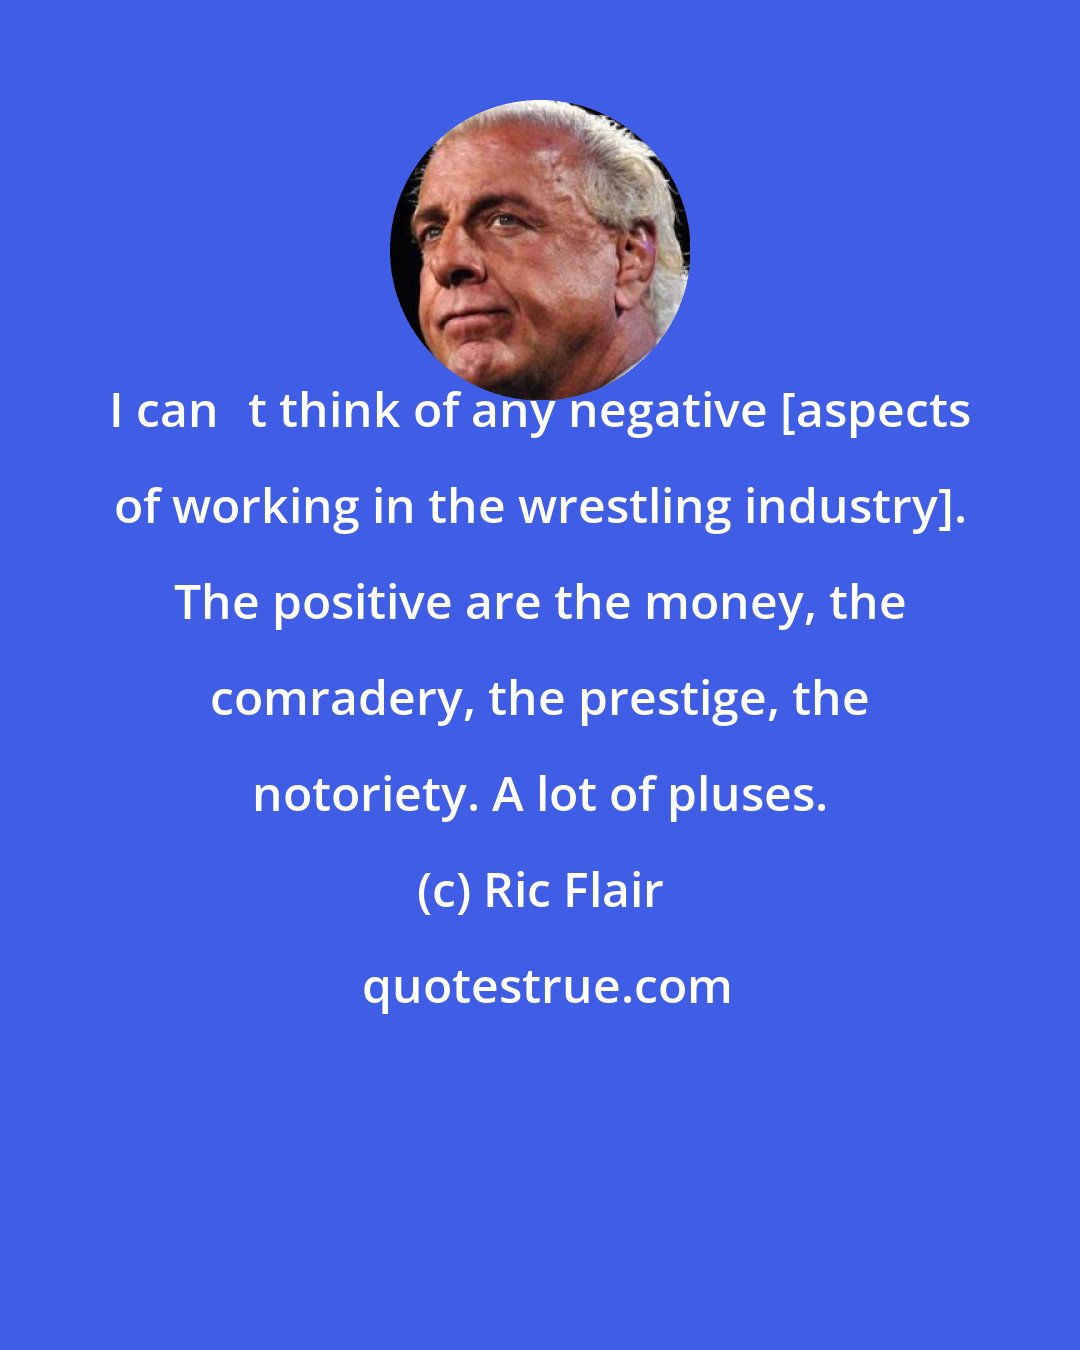 Ric Flair: I cant think of any negative [aspects of working in the wrestling industry]. The positive are the money, the comradery, the prestige, the notoriety. A lot of pluses.